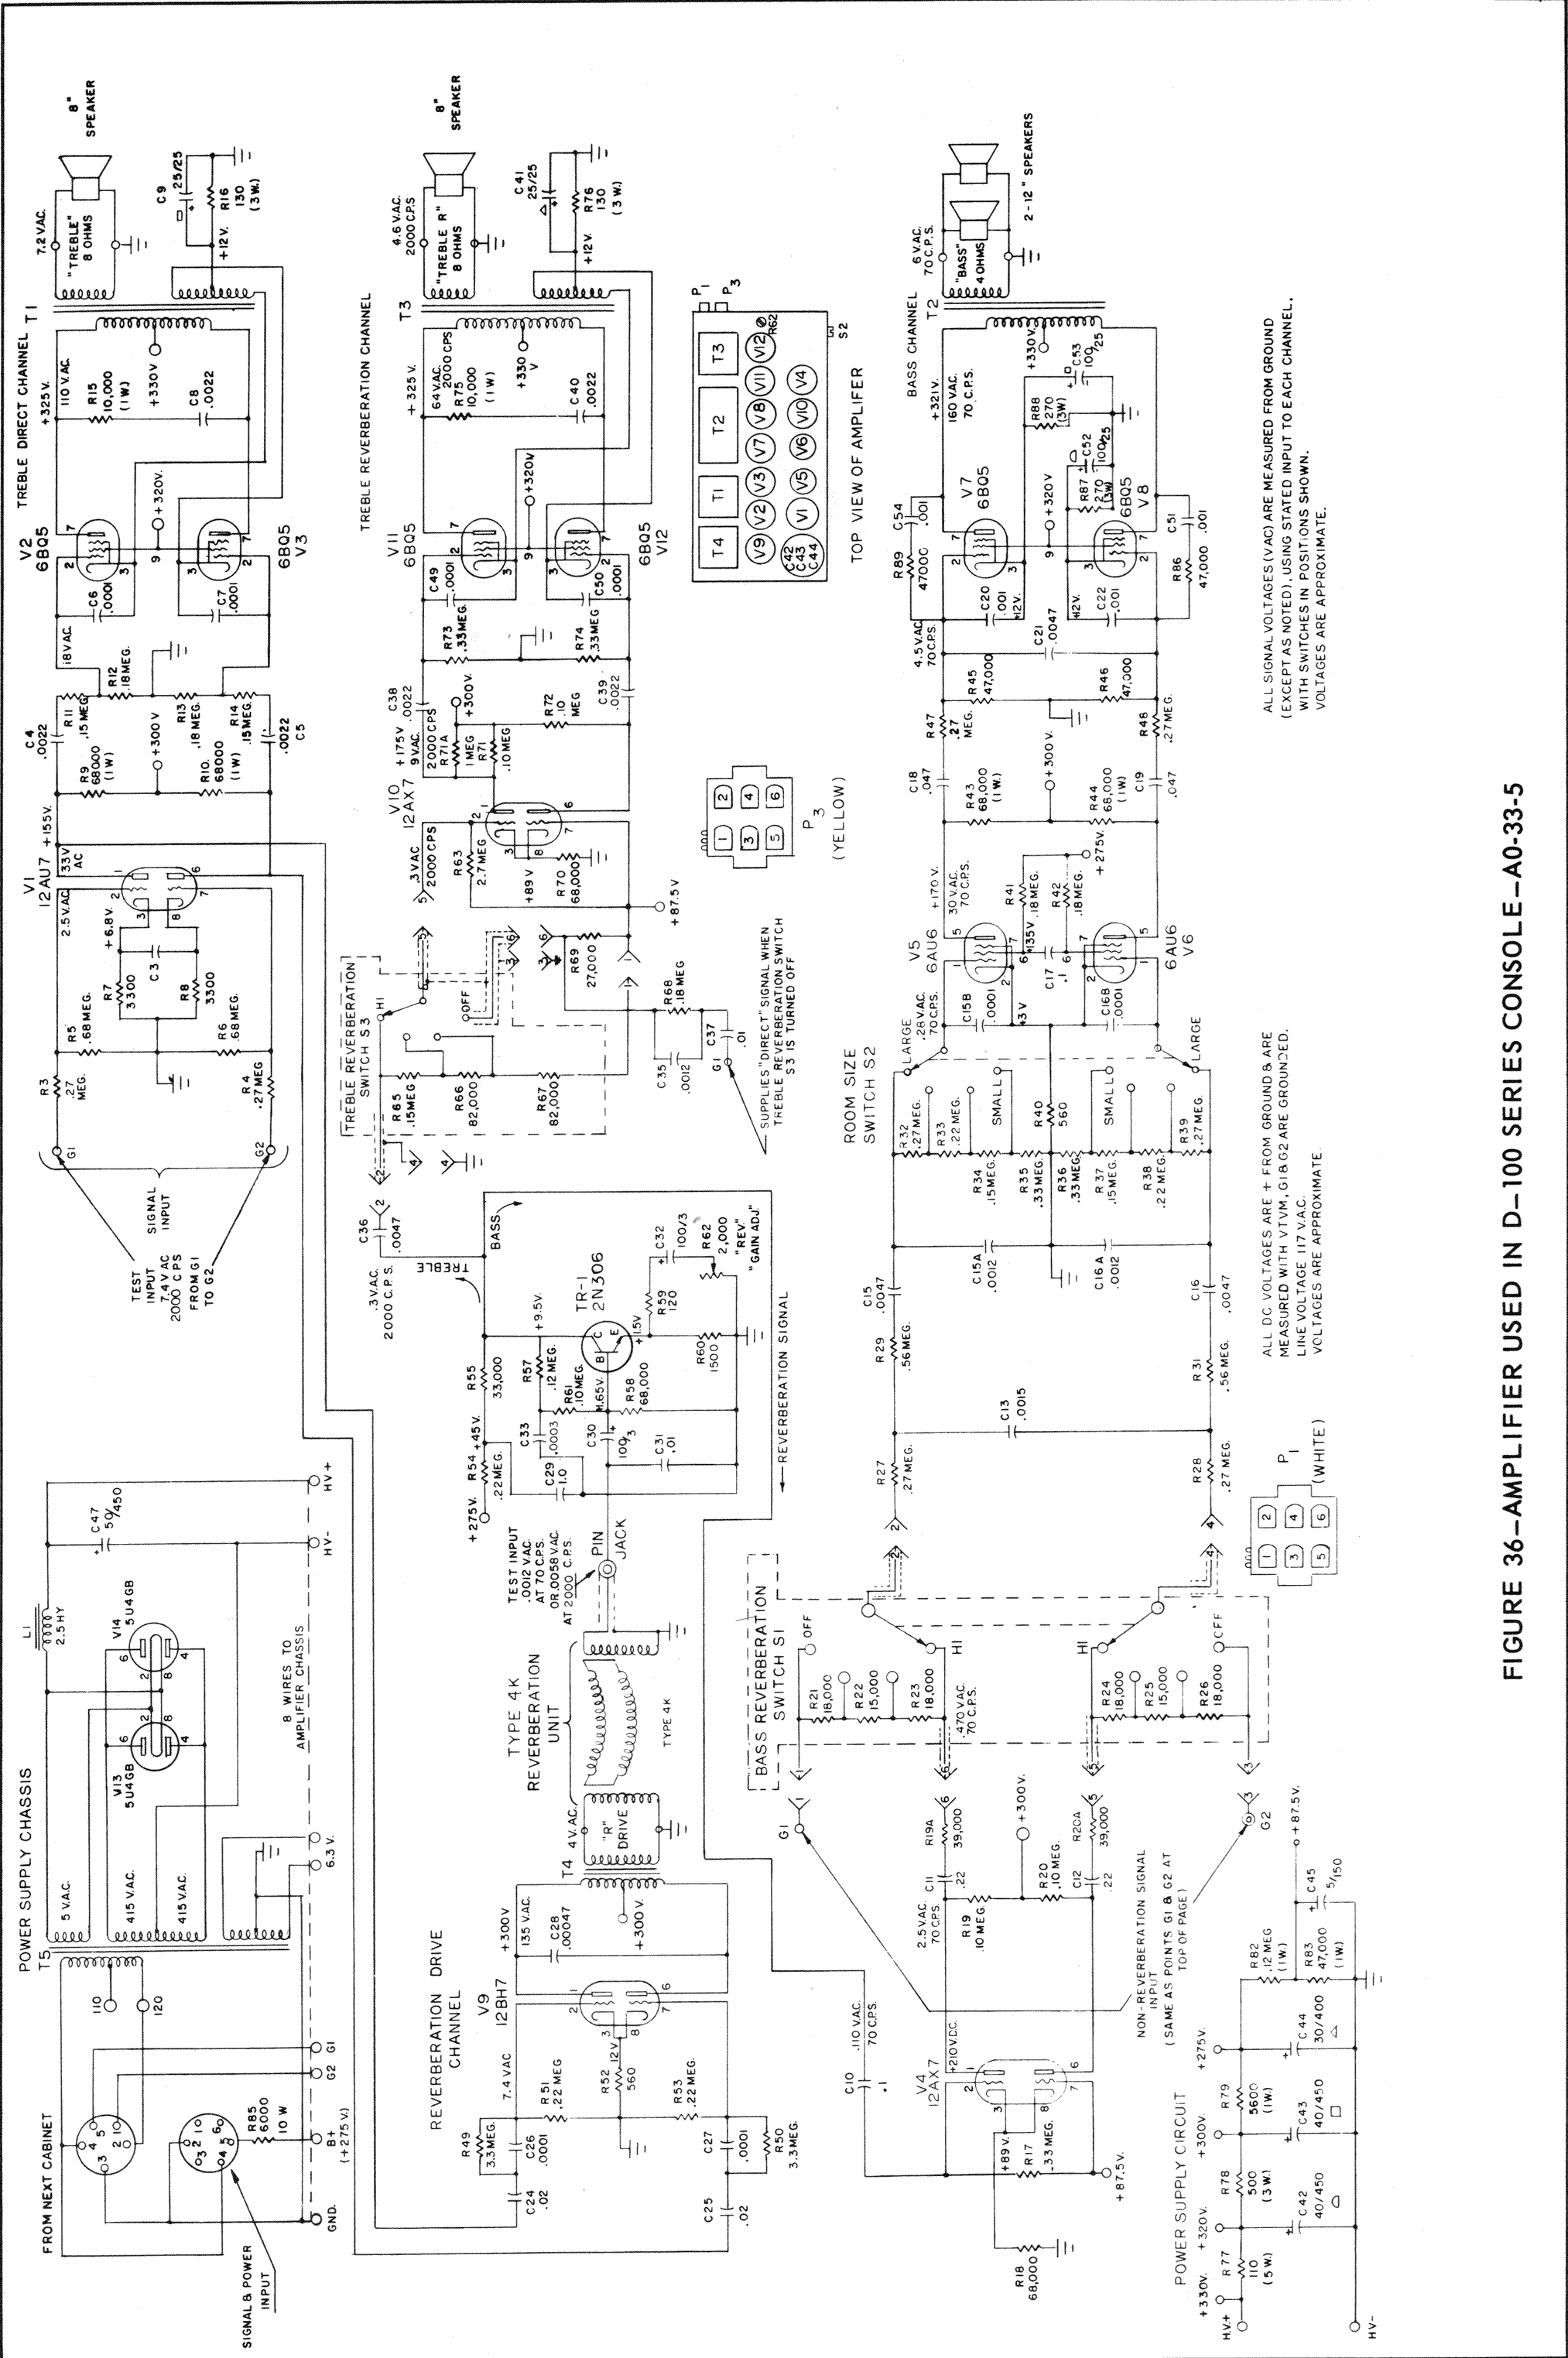 Hammond Schematics Here And Elsewhere On The Net